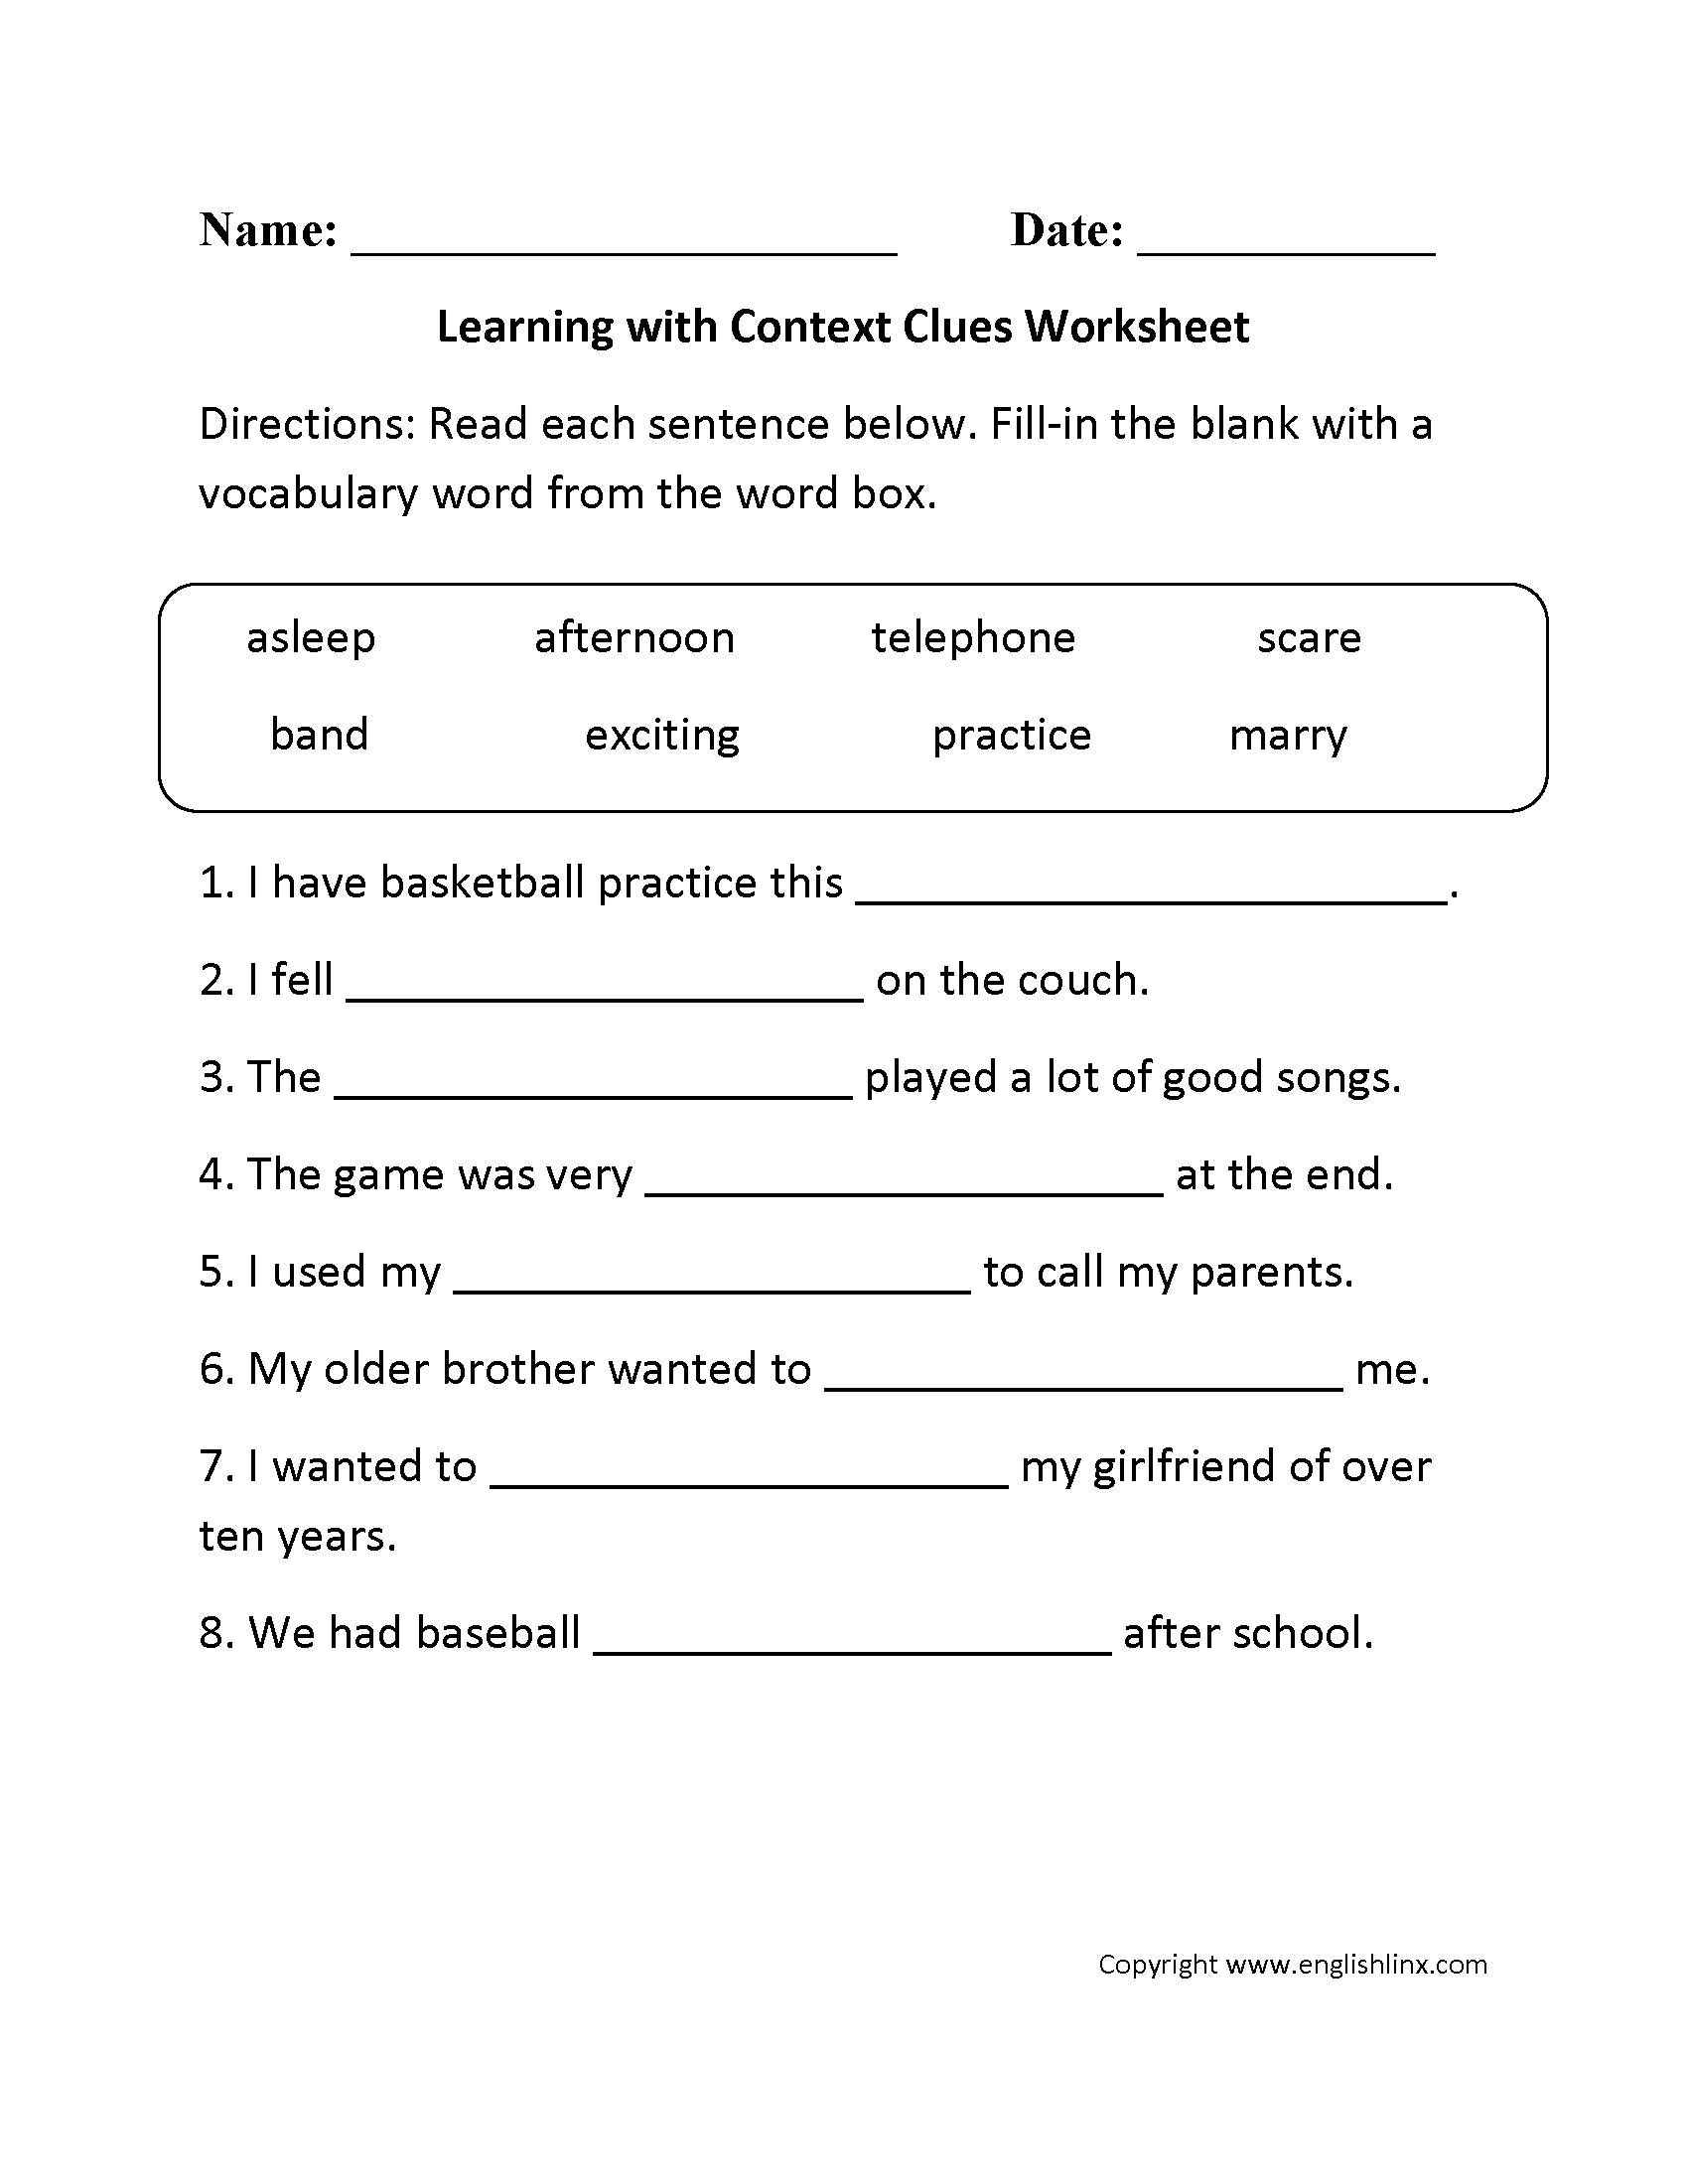 Reading Worksheets | Context Clues Worksheets | Grade 7 Vocabulary Worksheets Printable